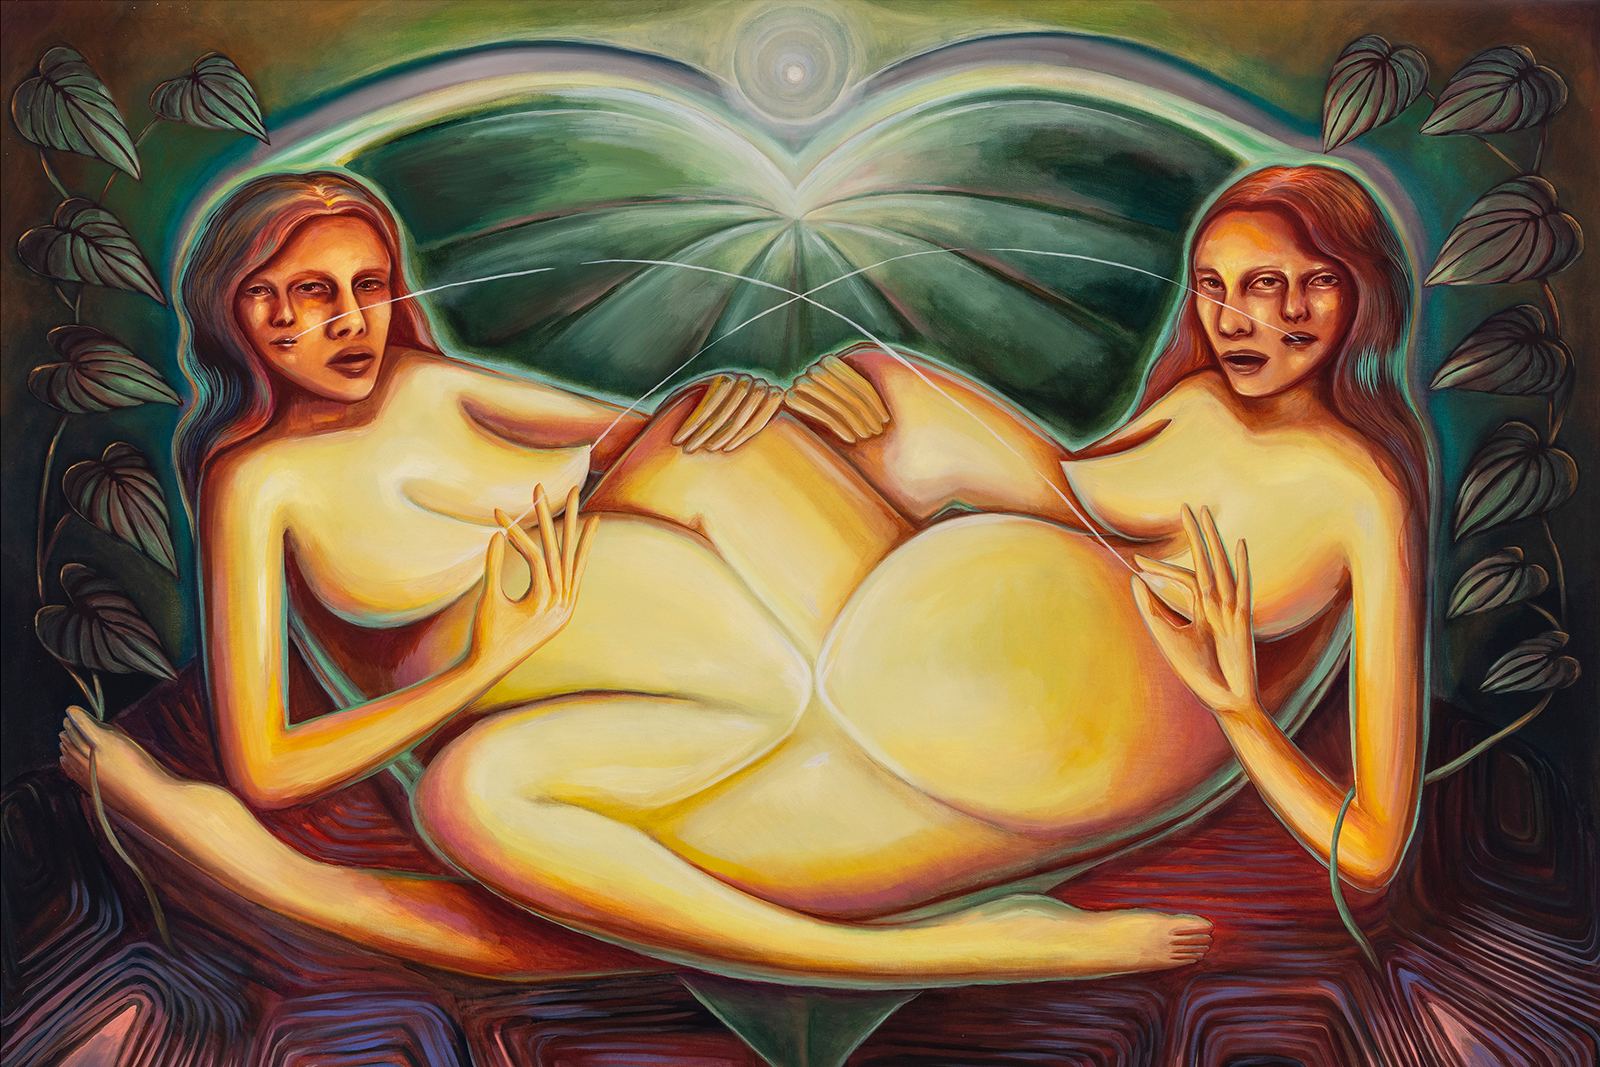 Happenings large painting by artist alicia reyes mcnamara showing two glowing pregnant figures with a green and red background